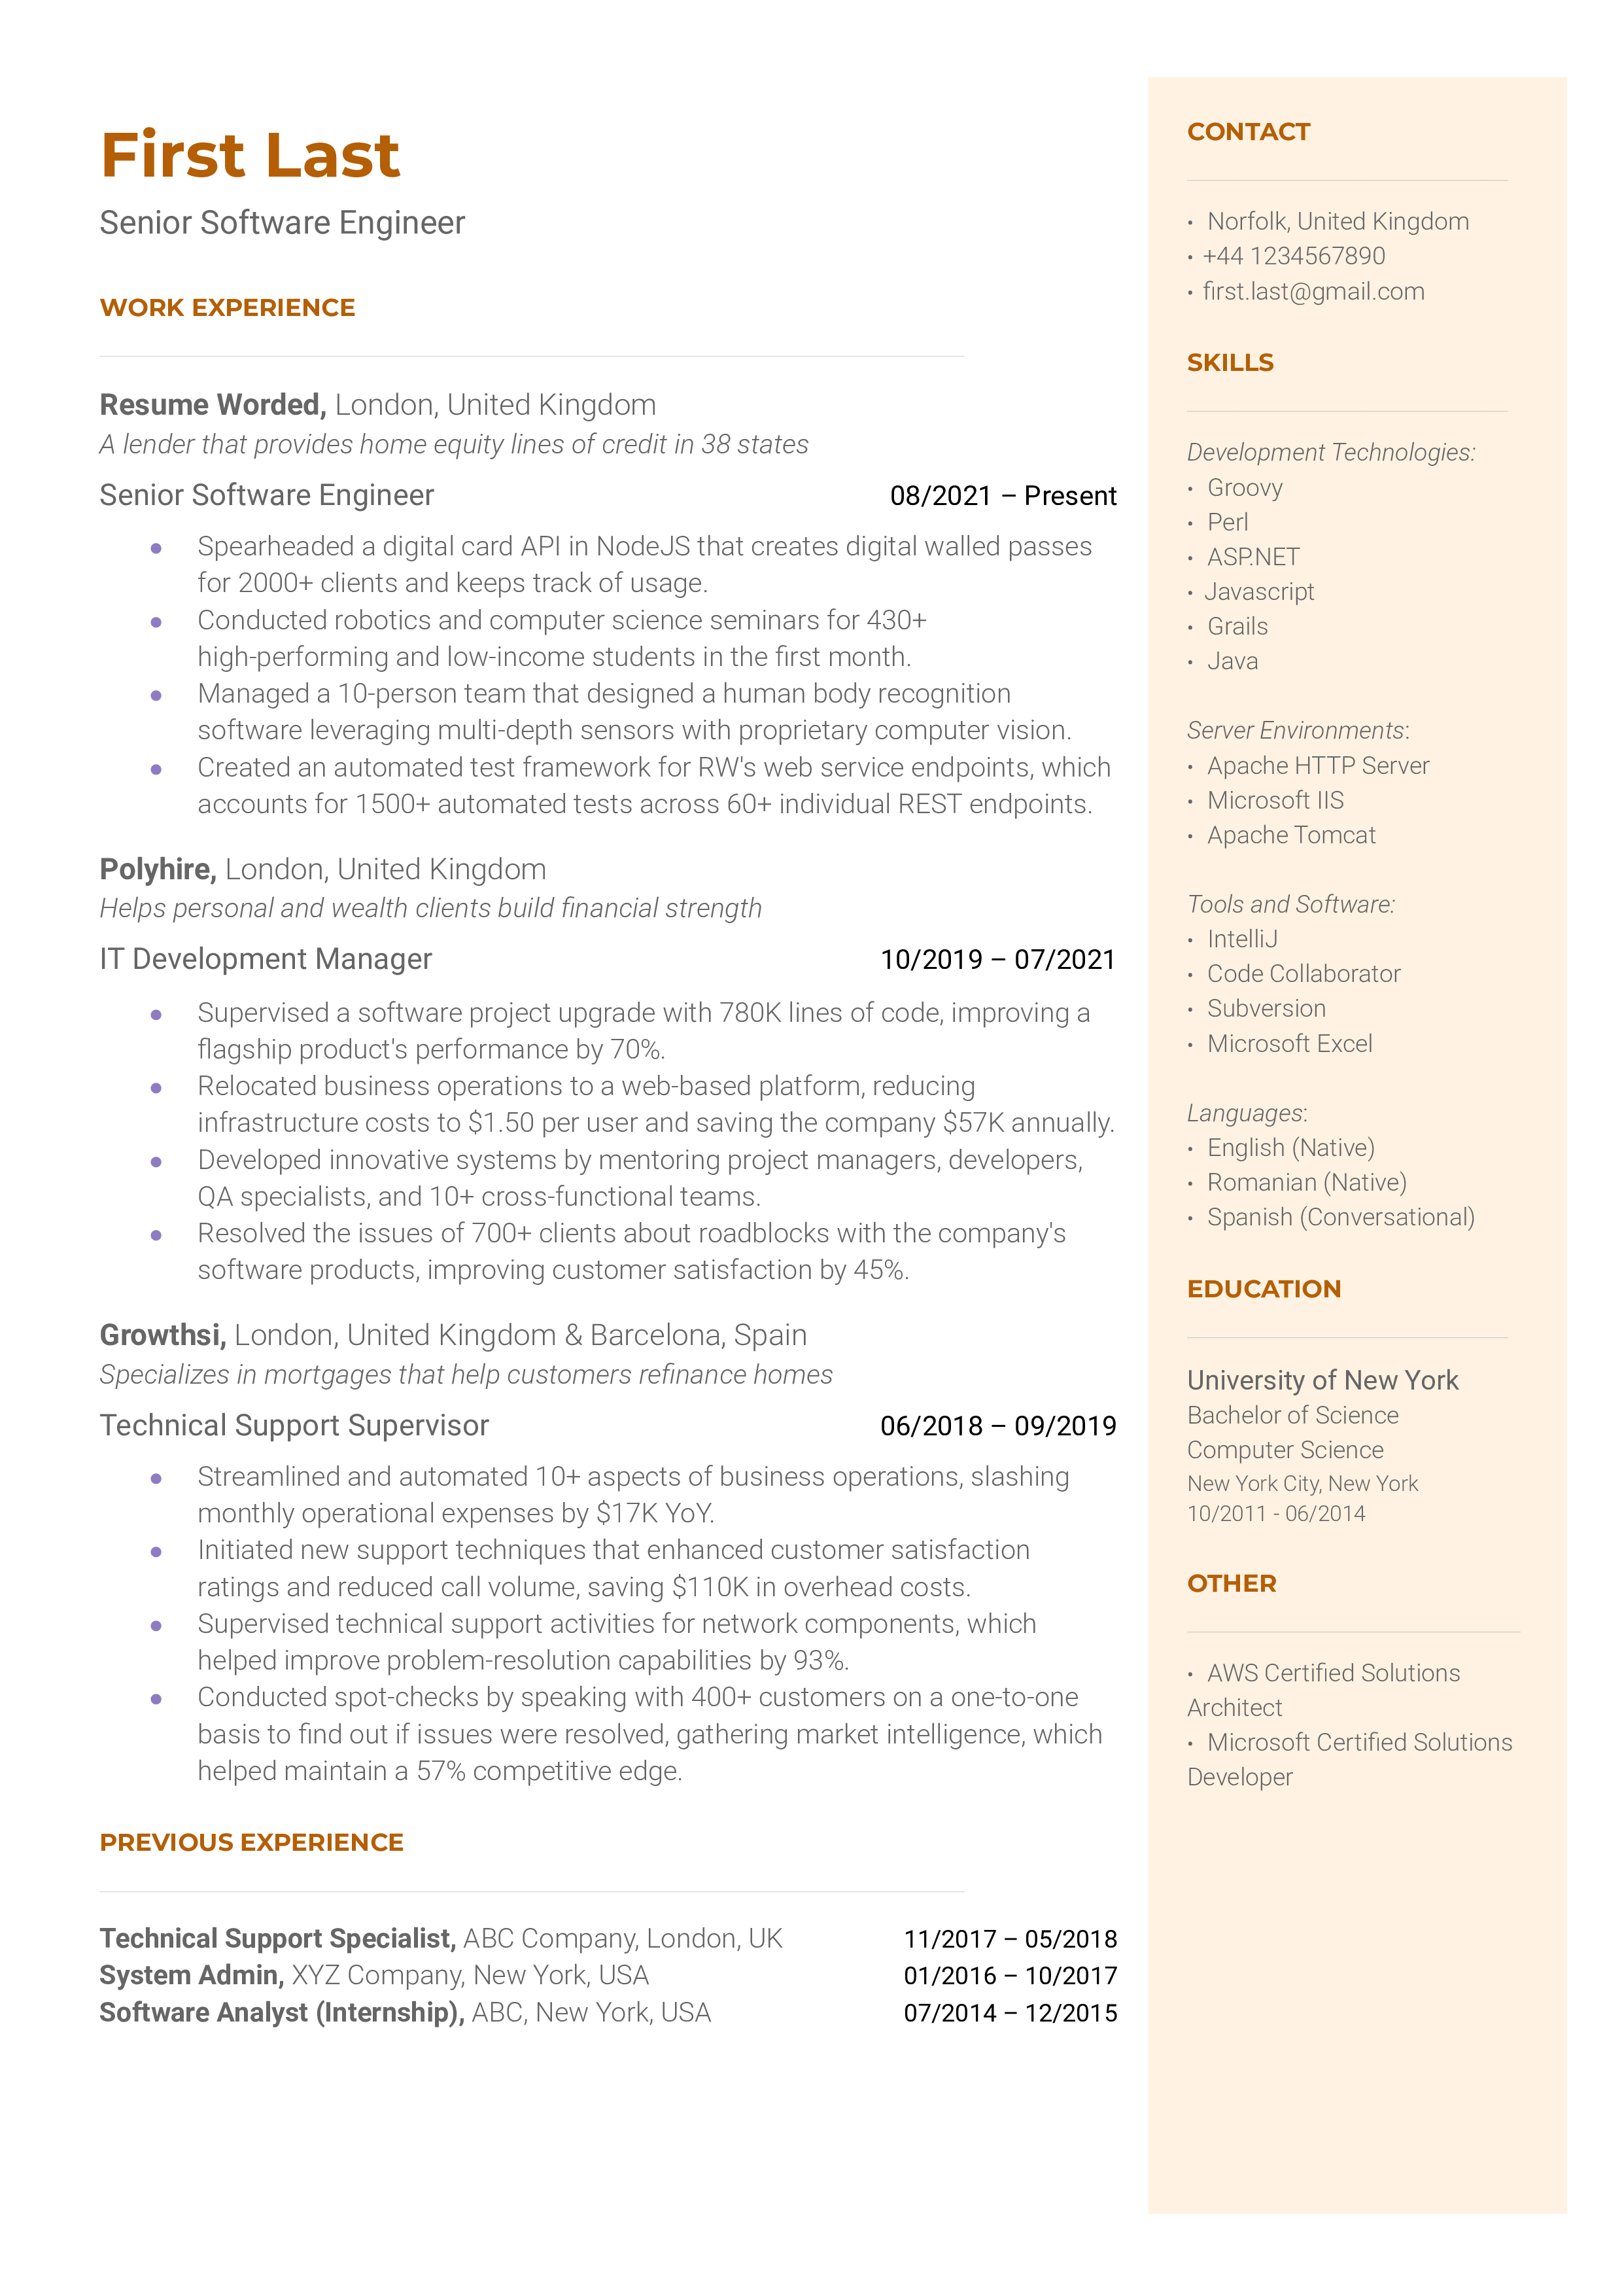 A resume for a senior software engineer with a degree in computer science and prior experience as a software engineer II.